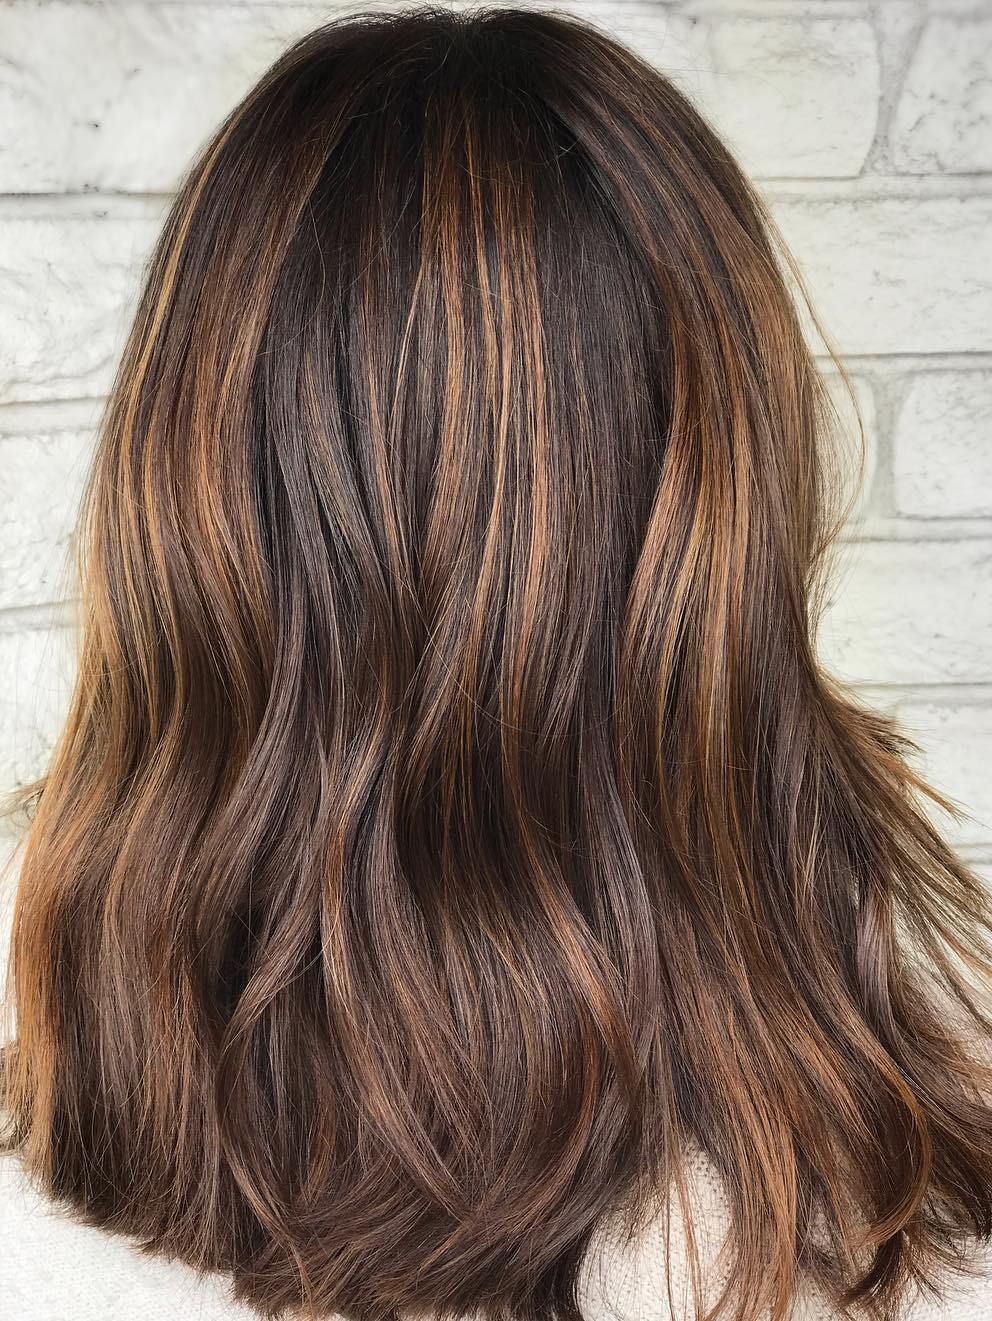 Caramel-Highlights Top 75+ Hair Color Ideas for Women in 2022